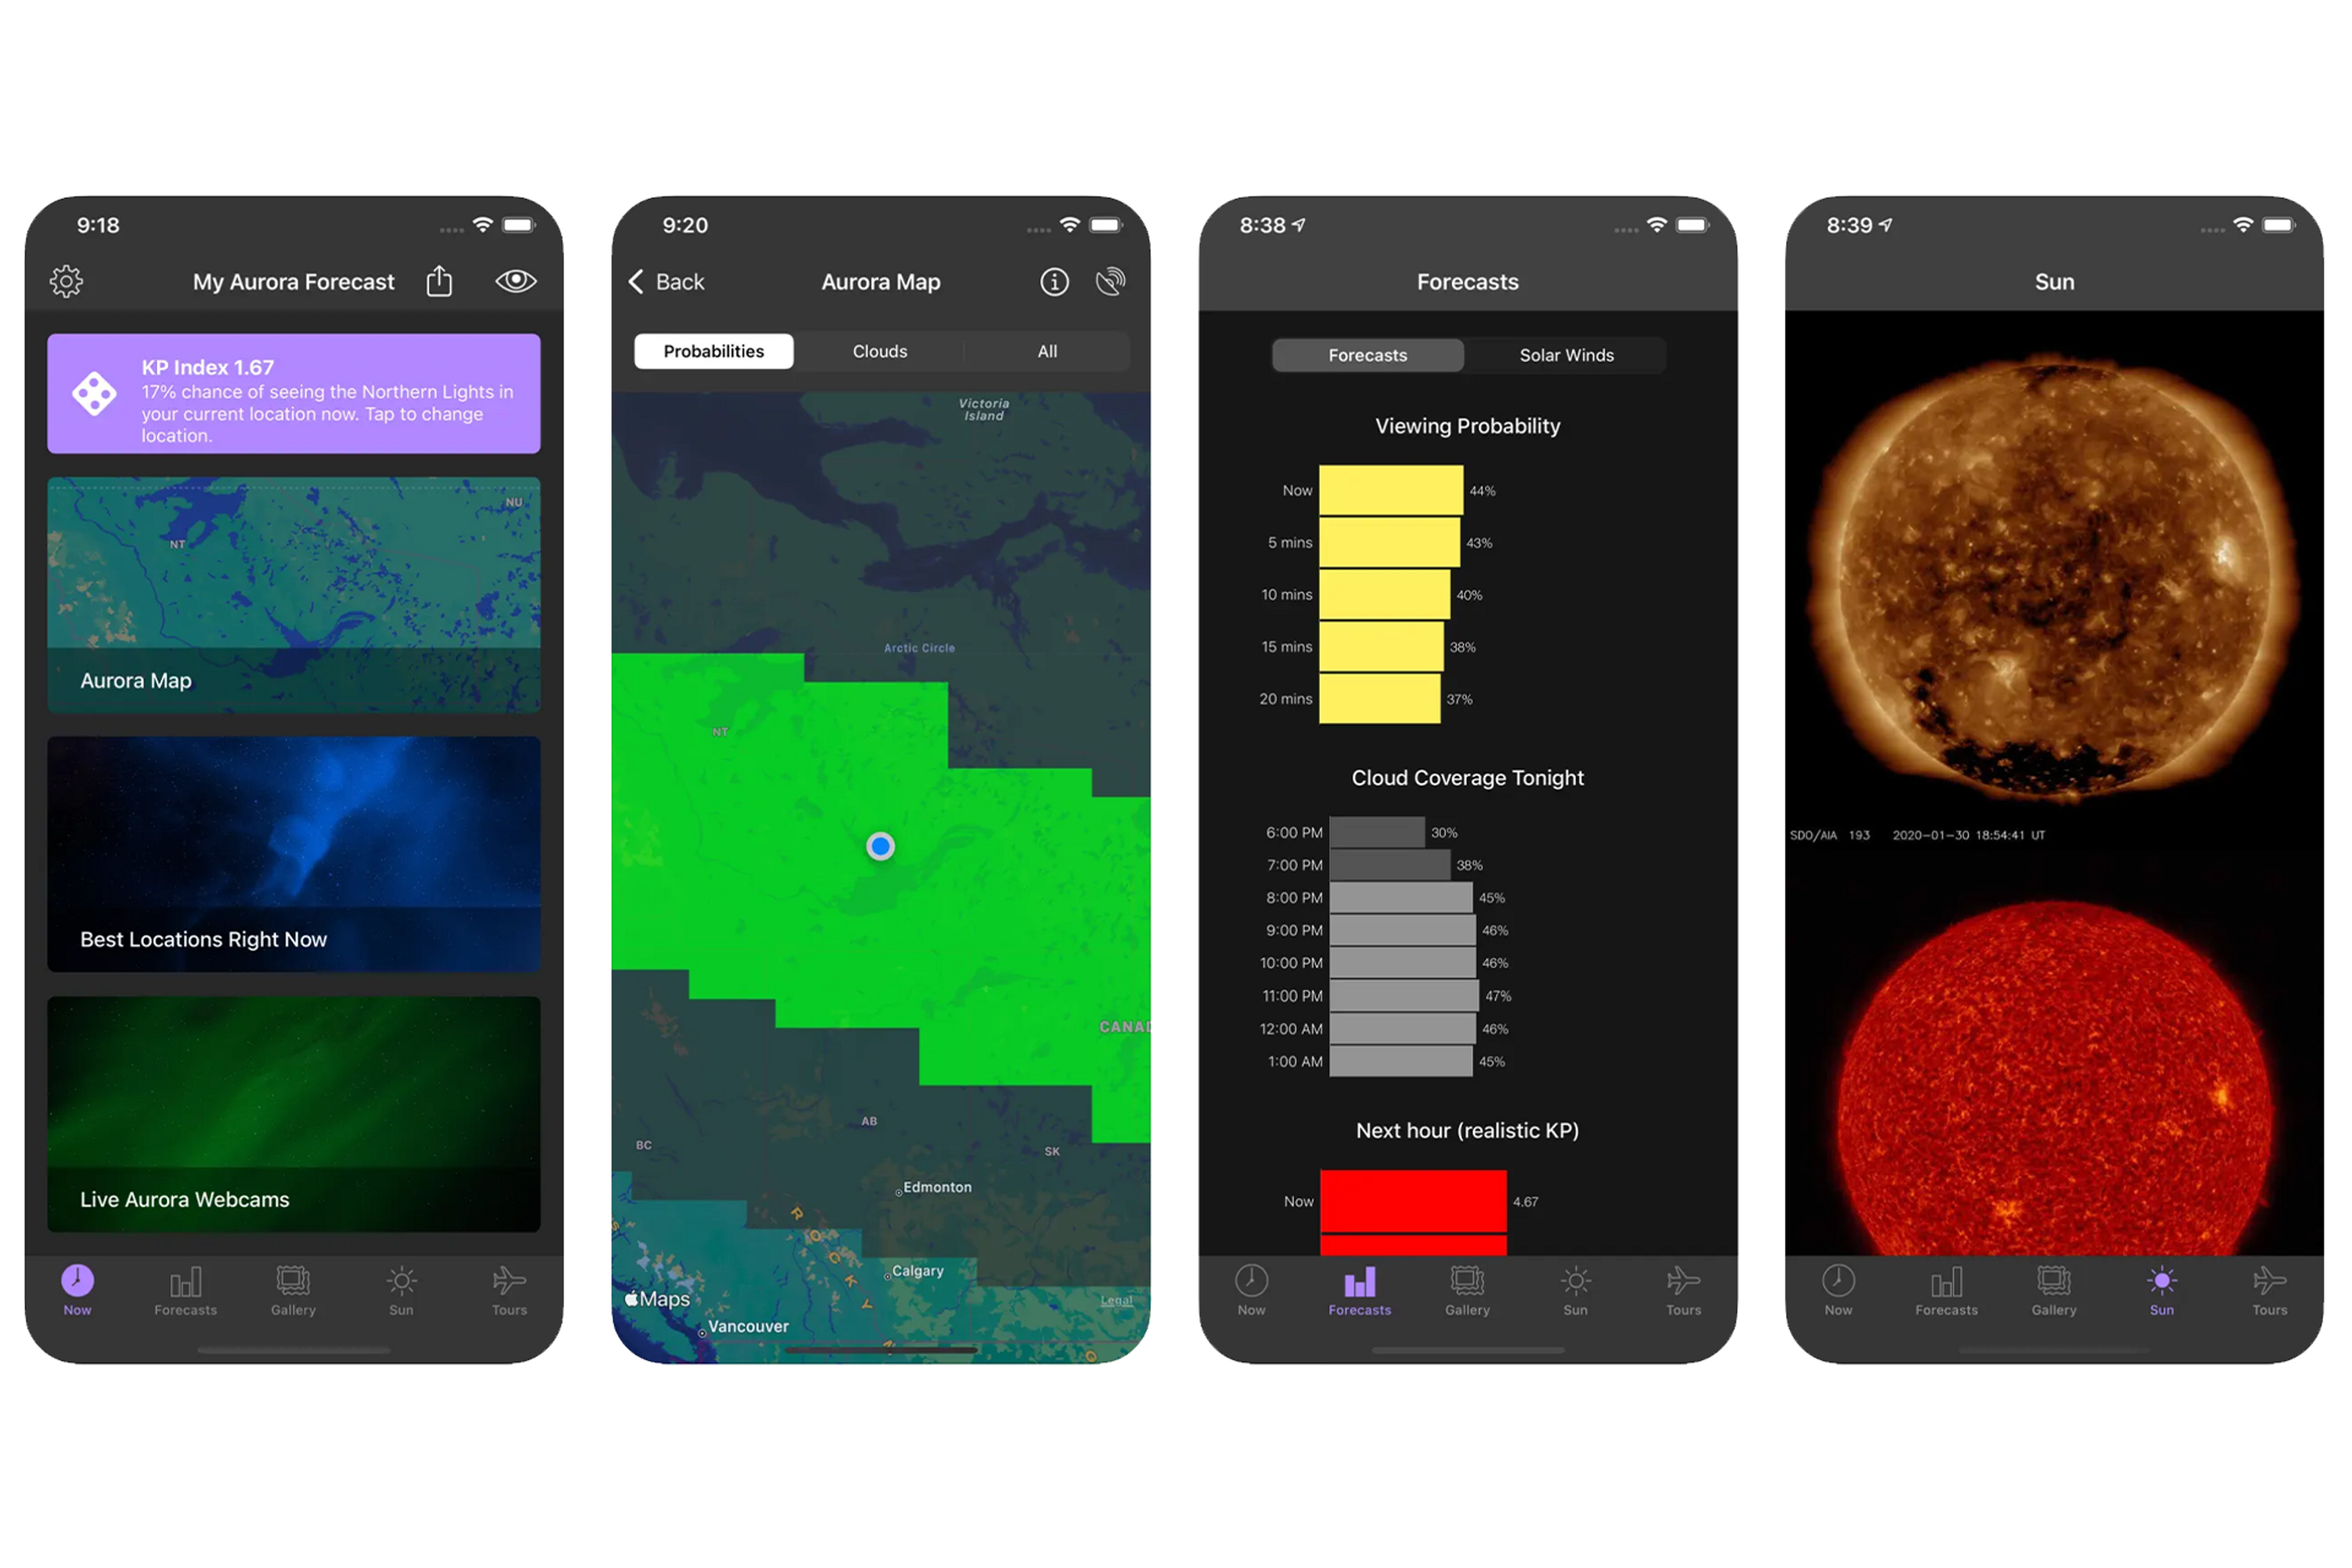 My Aurora app that shows Forecast & Alerts for northern lights